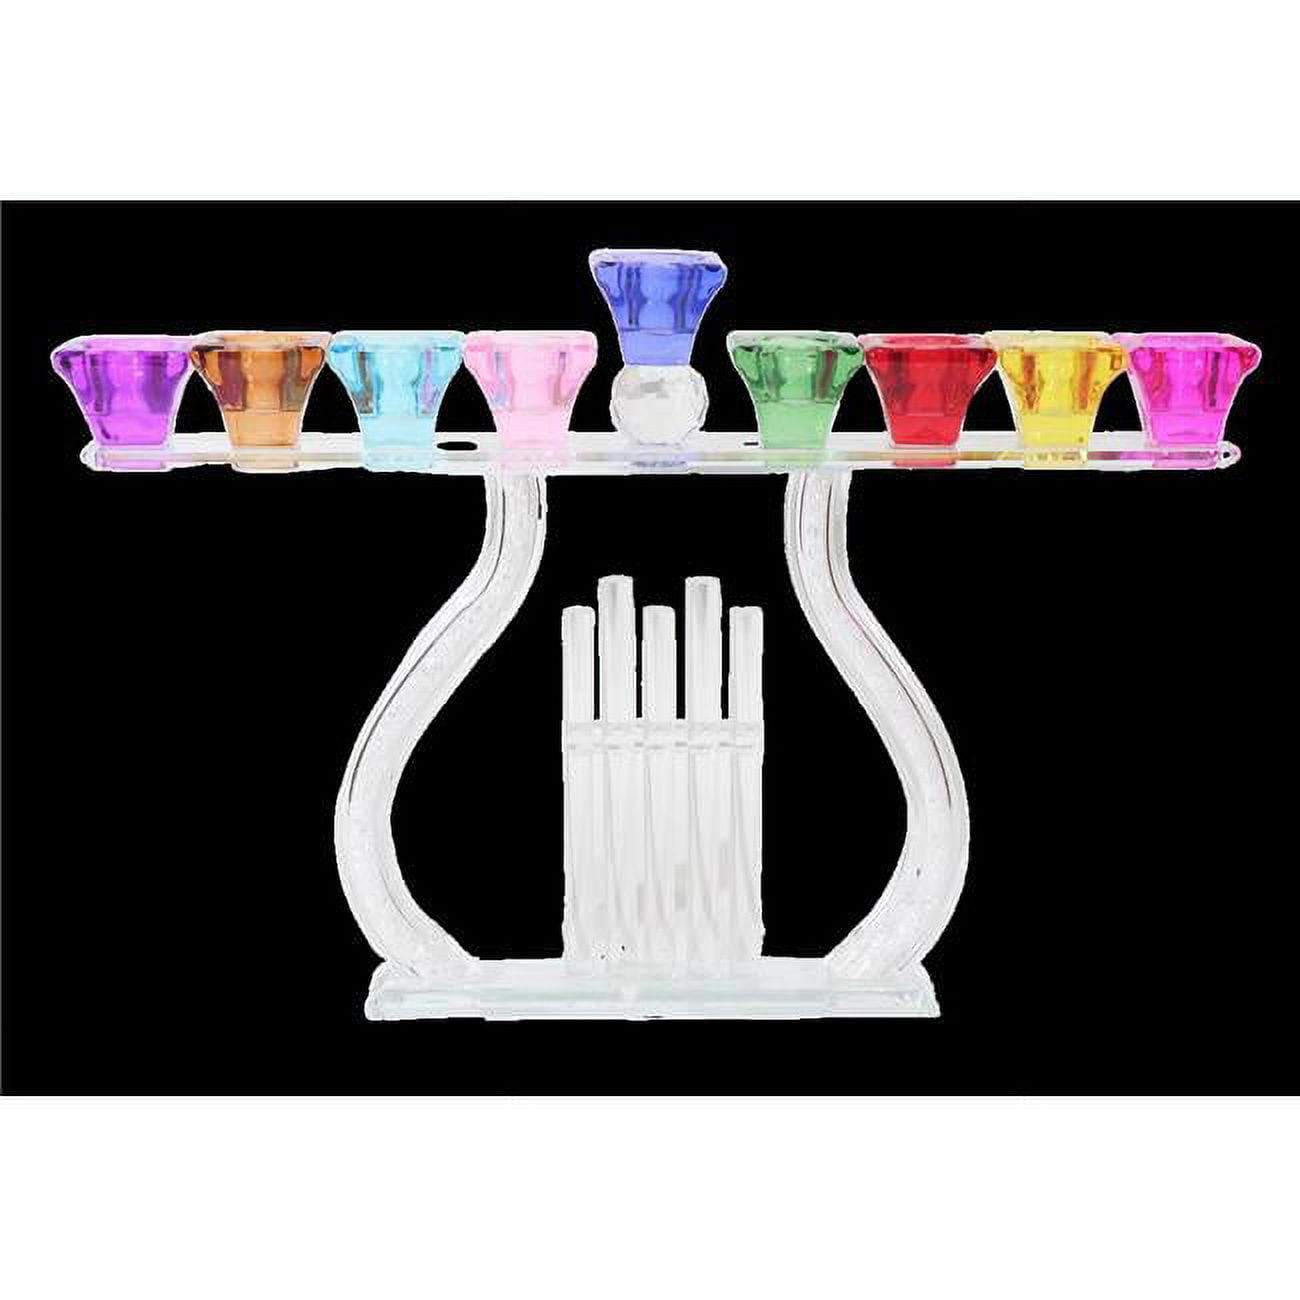 Picture of Schonfeld Collection 182966 8 x 14.5 in. Crystal Menorah with Colored Cups